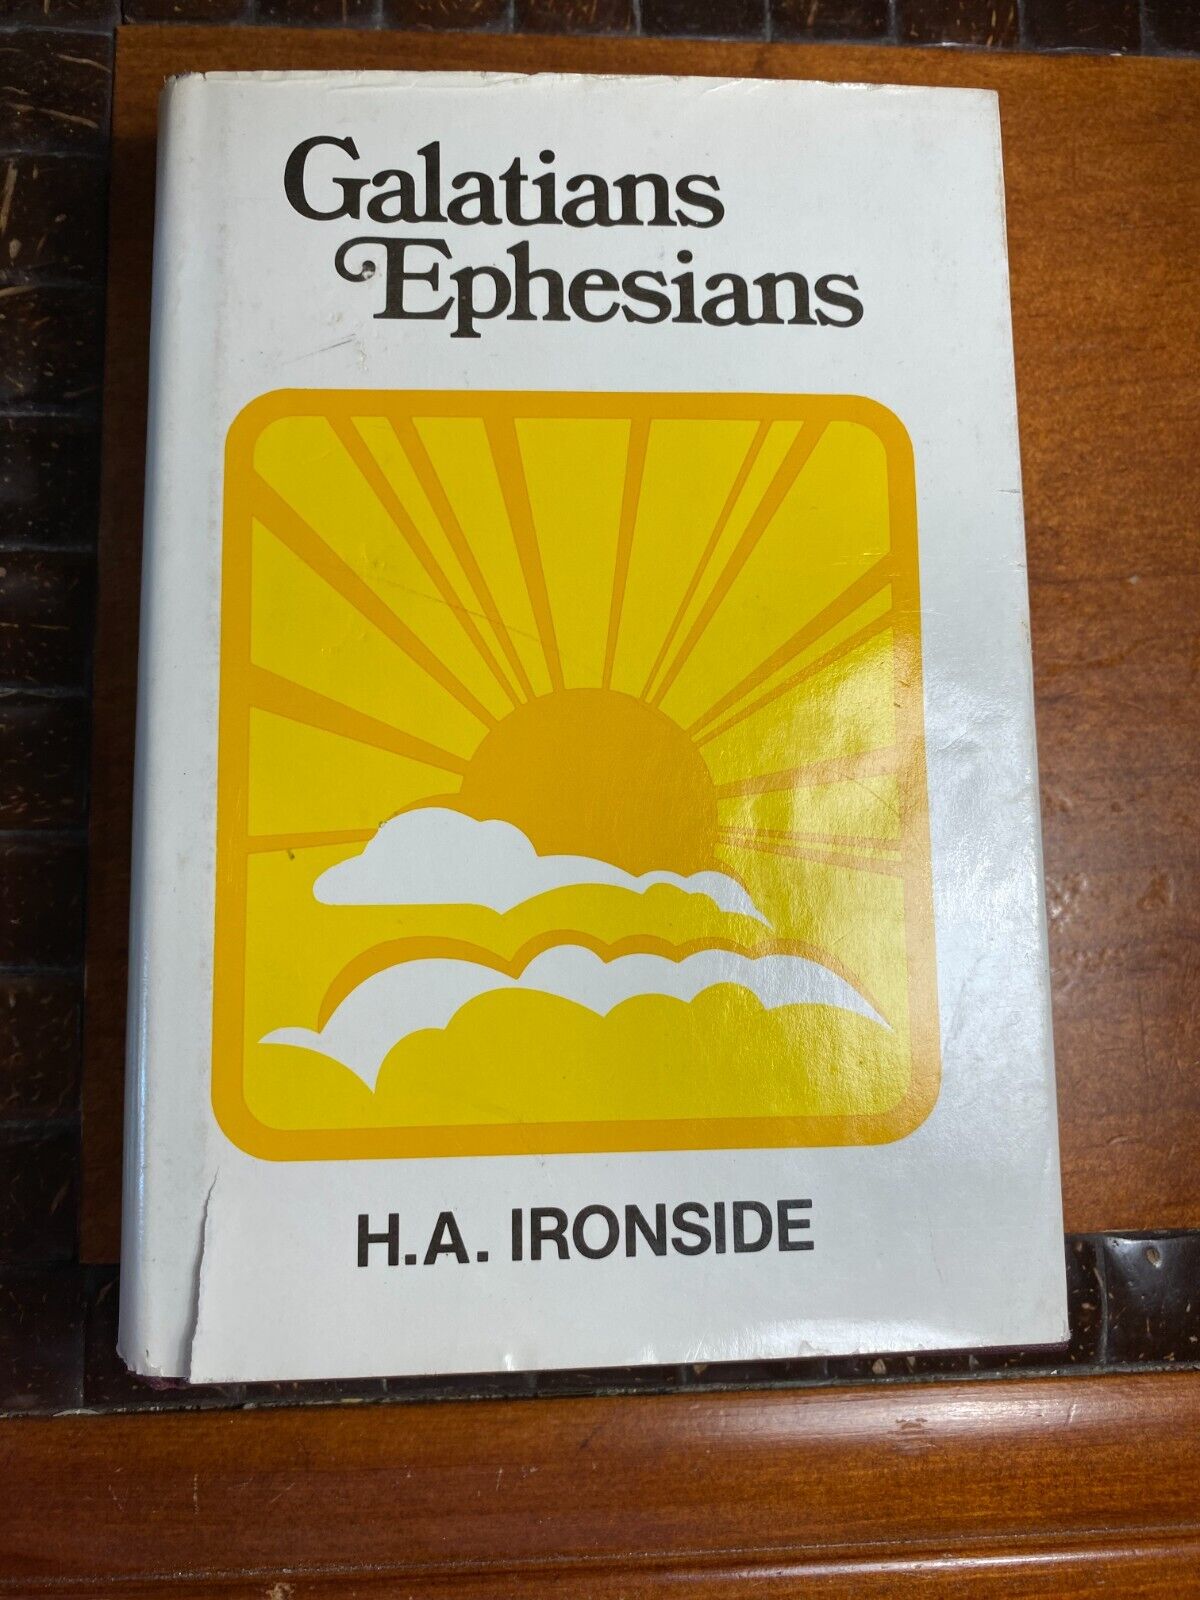 Galatians and Ephesians (In the Heavenlies) by H. A. Ironside